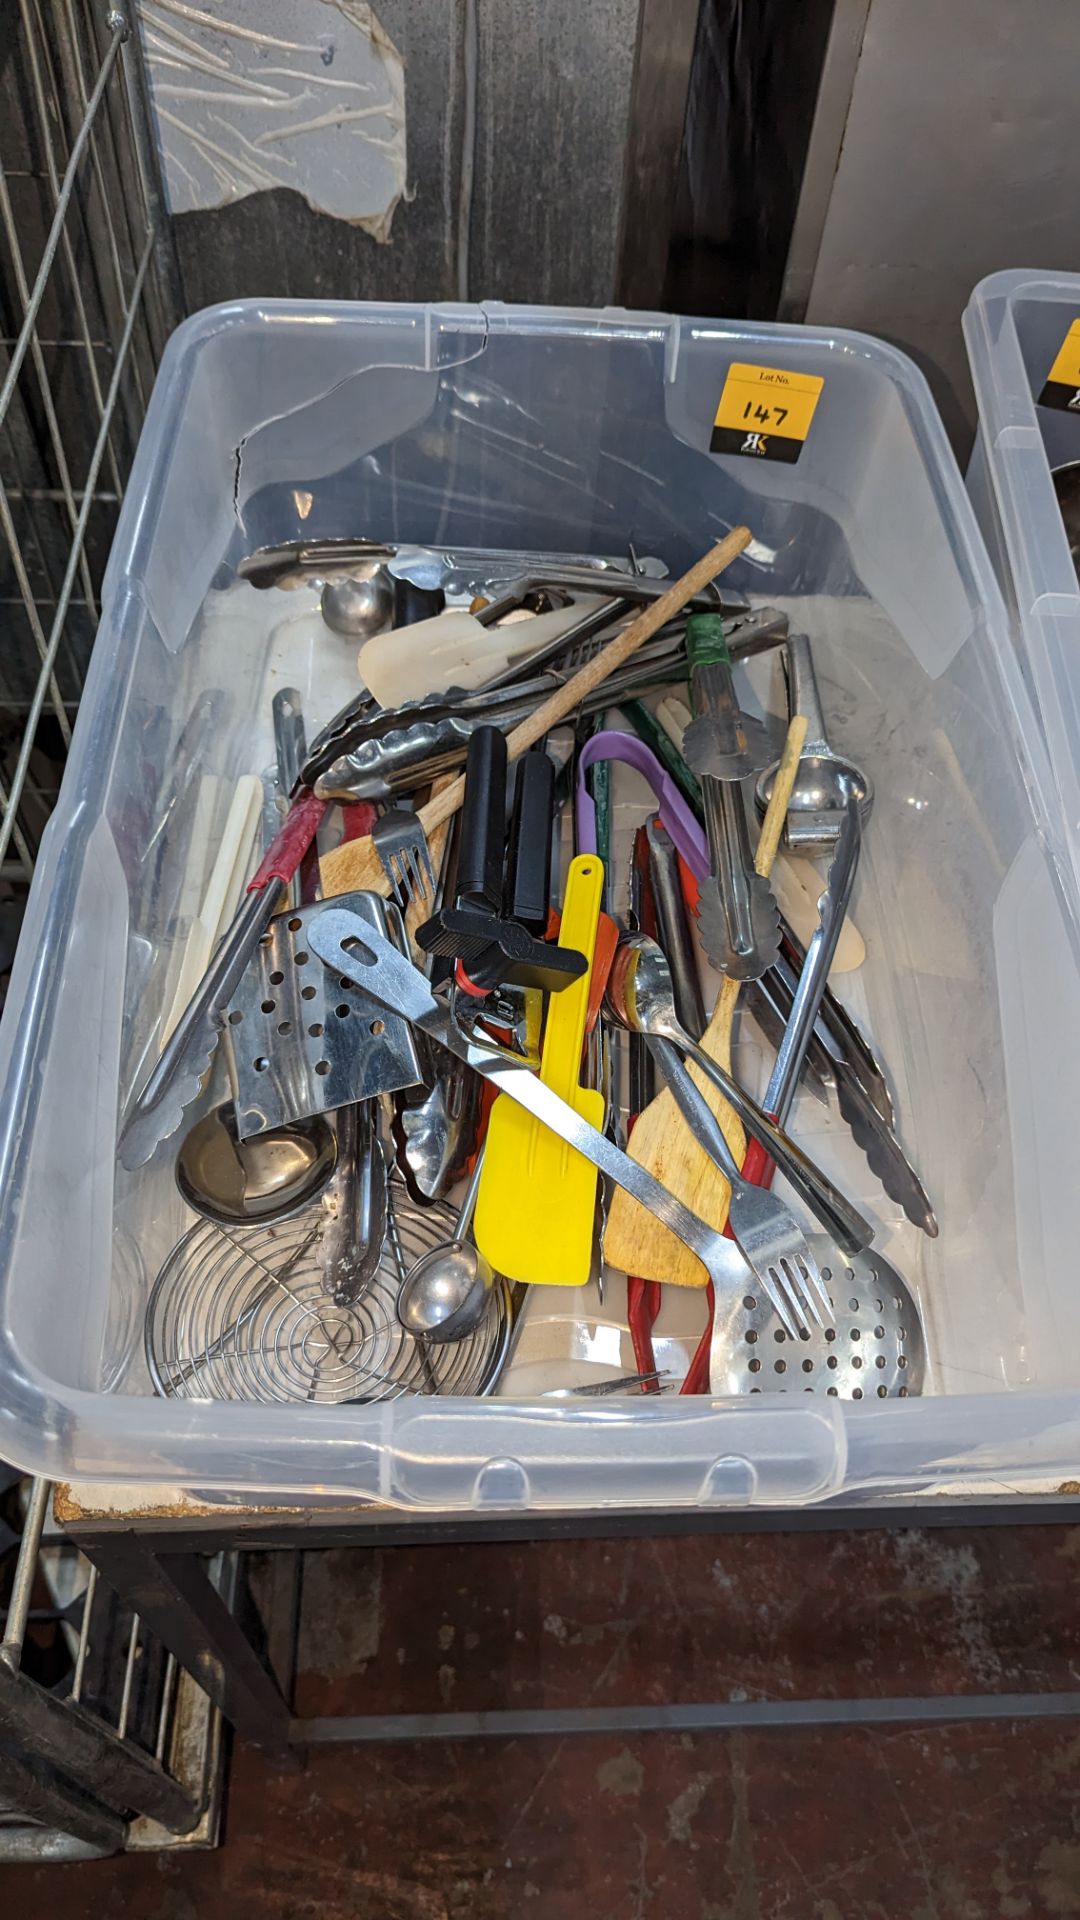 The contents of a crate of utensils